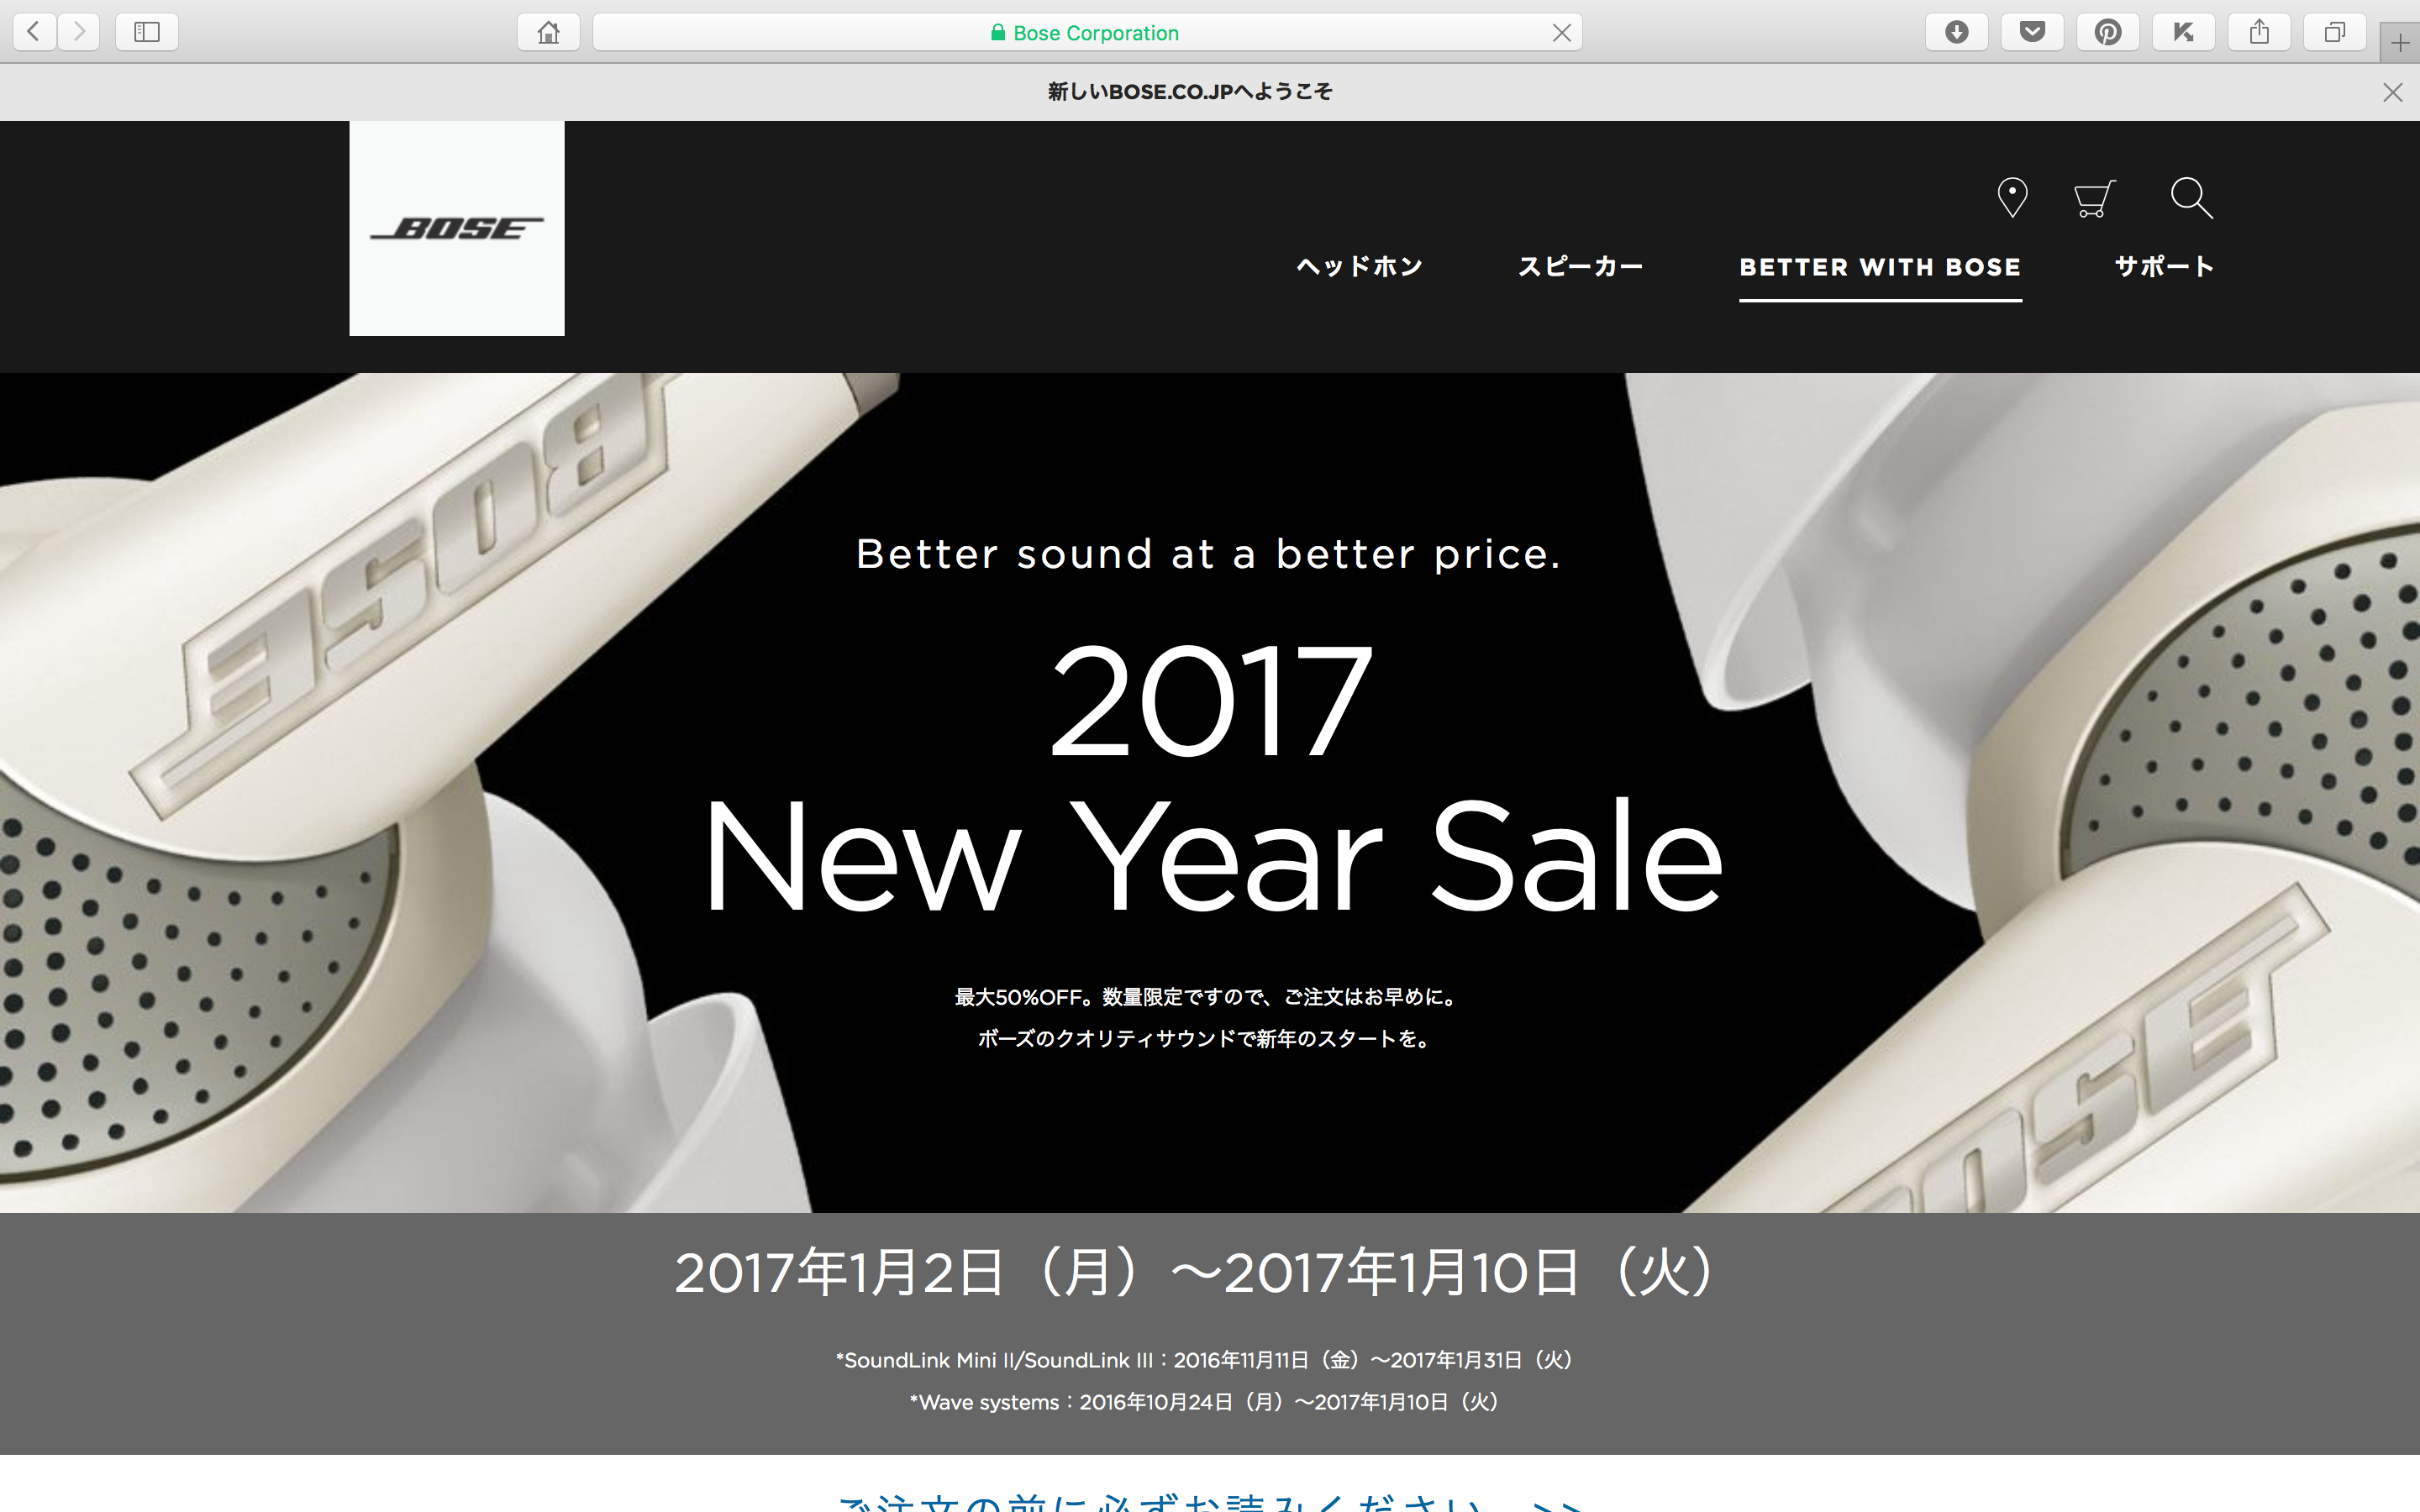 New Year Sale 2017